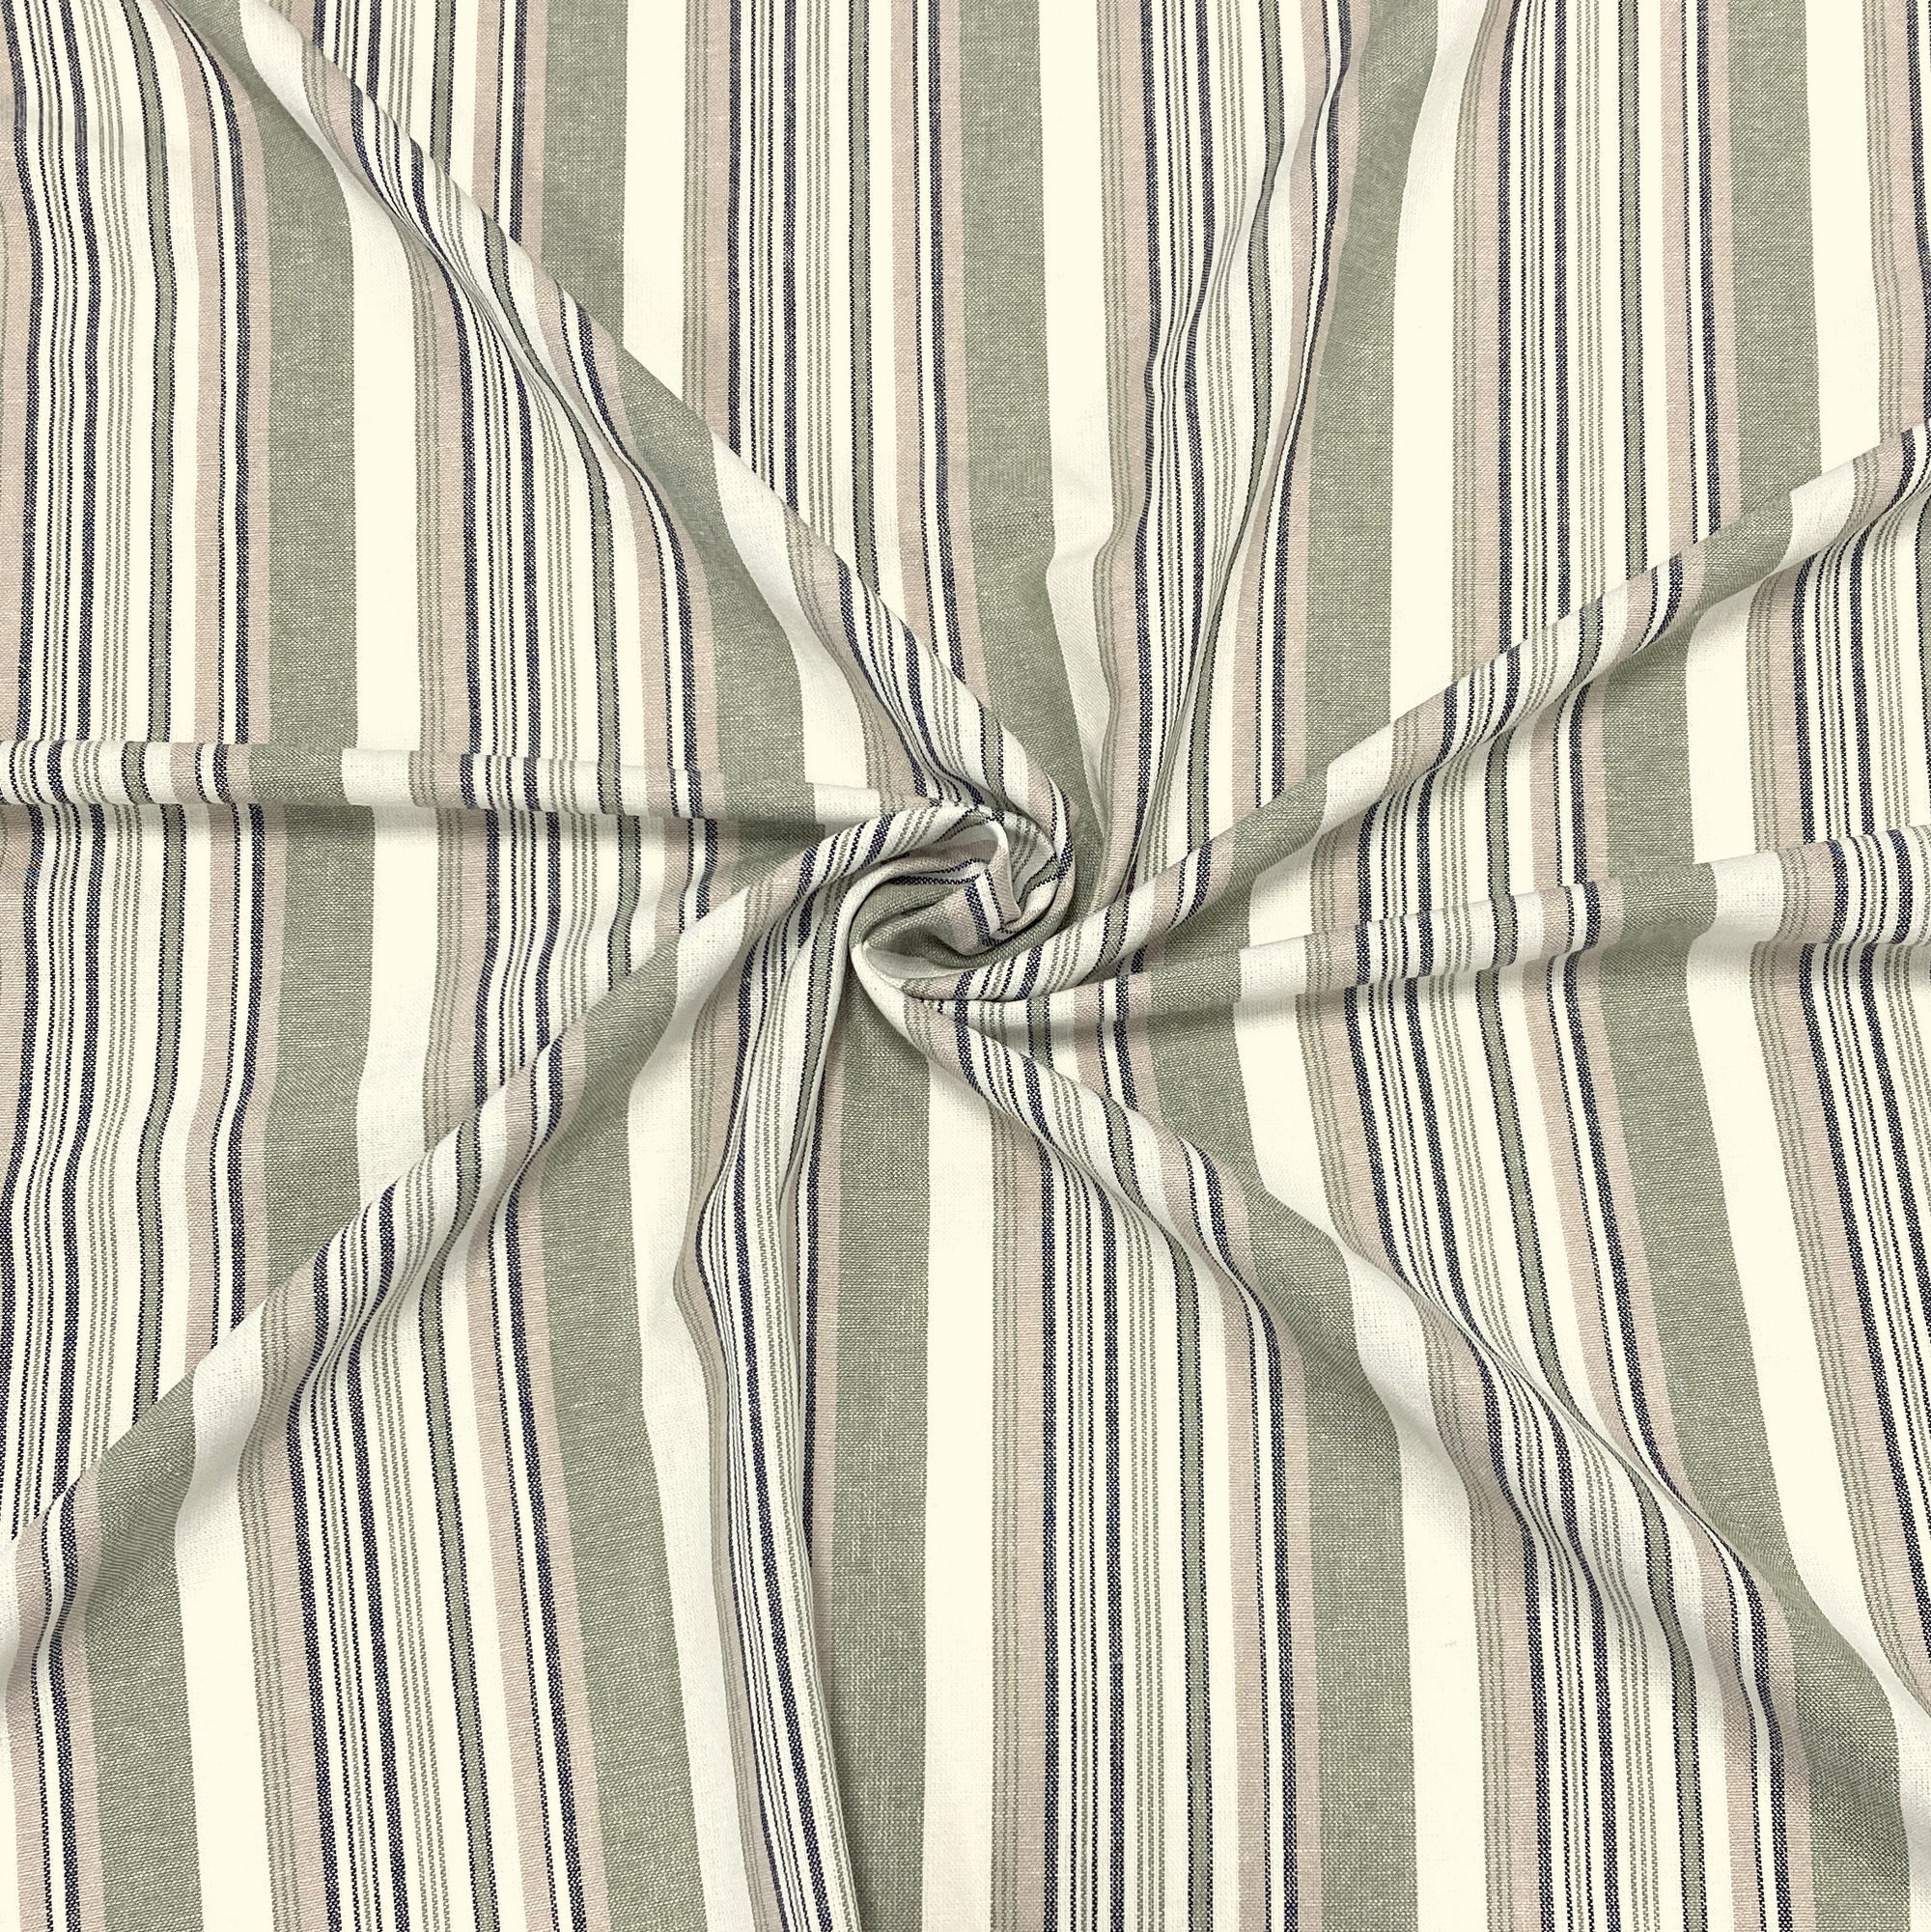 Sage Green Black and Off White Yarn Dyed Vertical Stripe Light to Medium Weight Rayon Linen